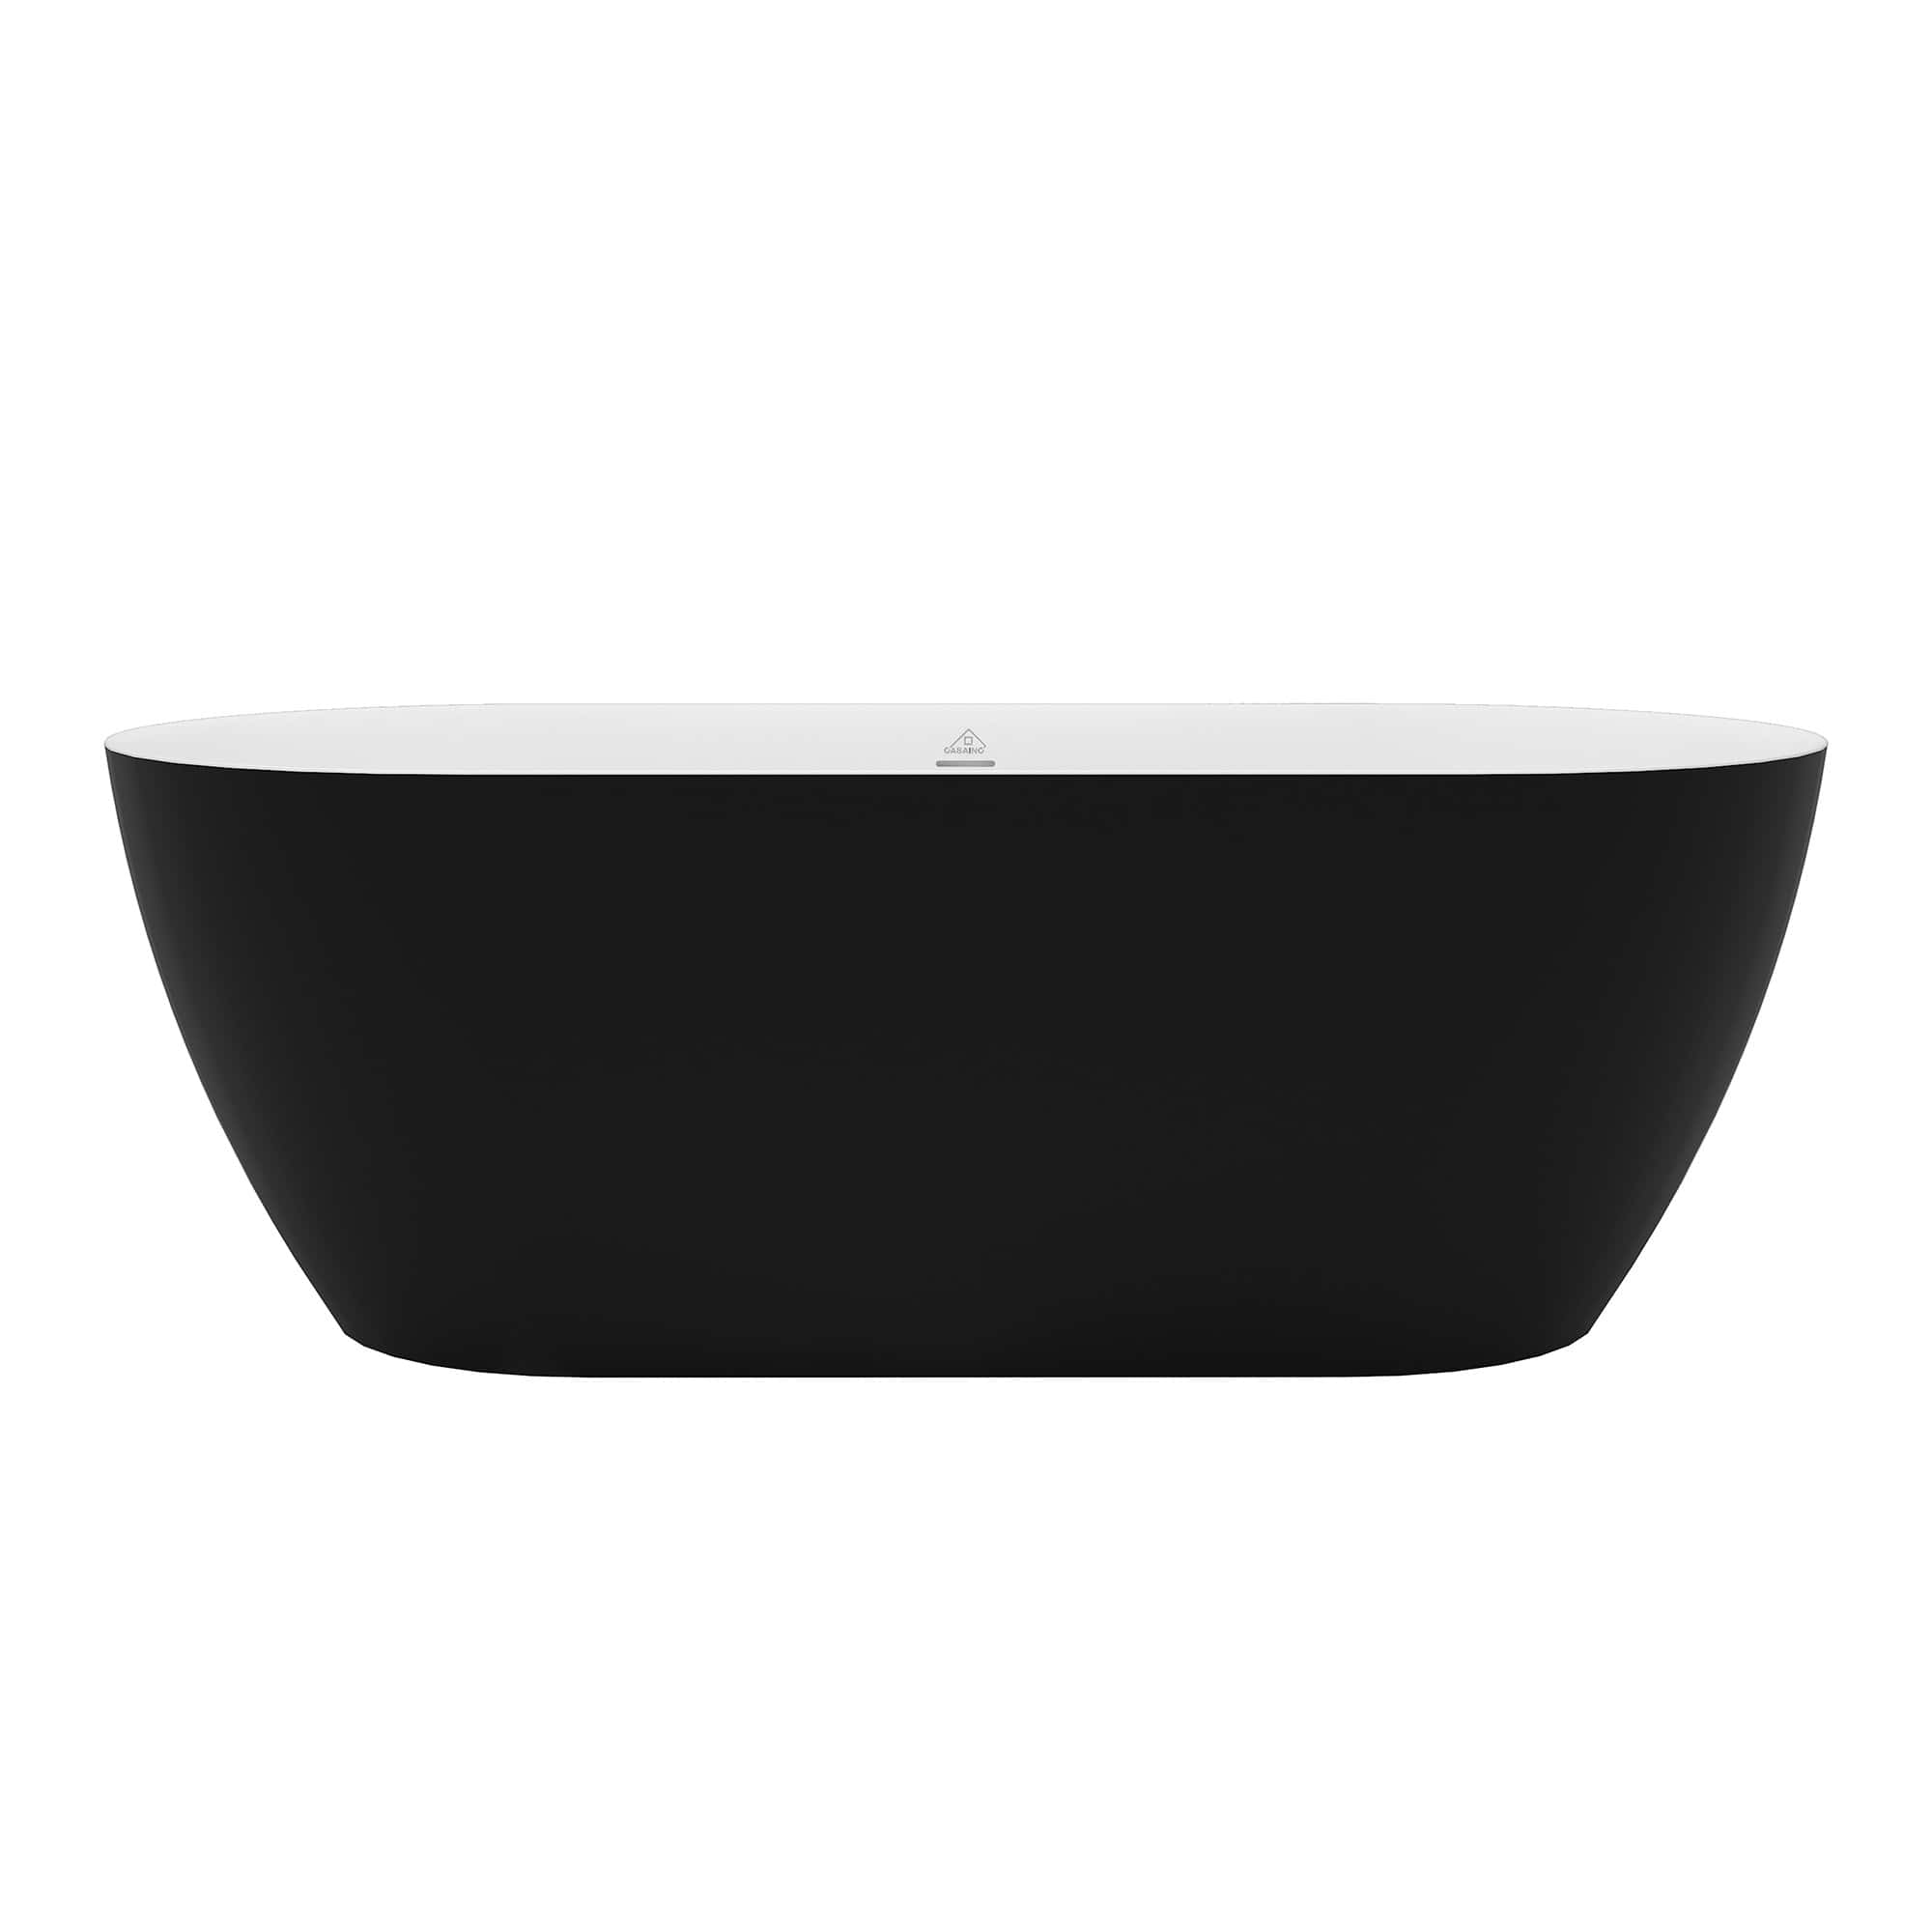  59/67 Inch Matte Black Outside and White Inside Freestanding Solid Surface Soaking Tub